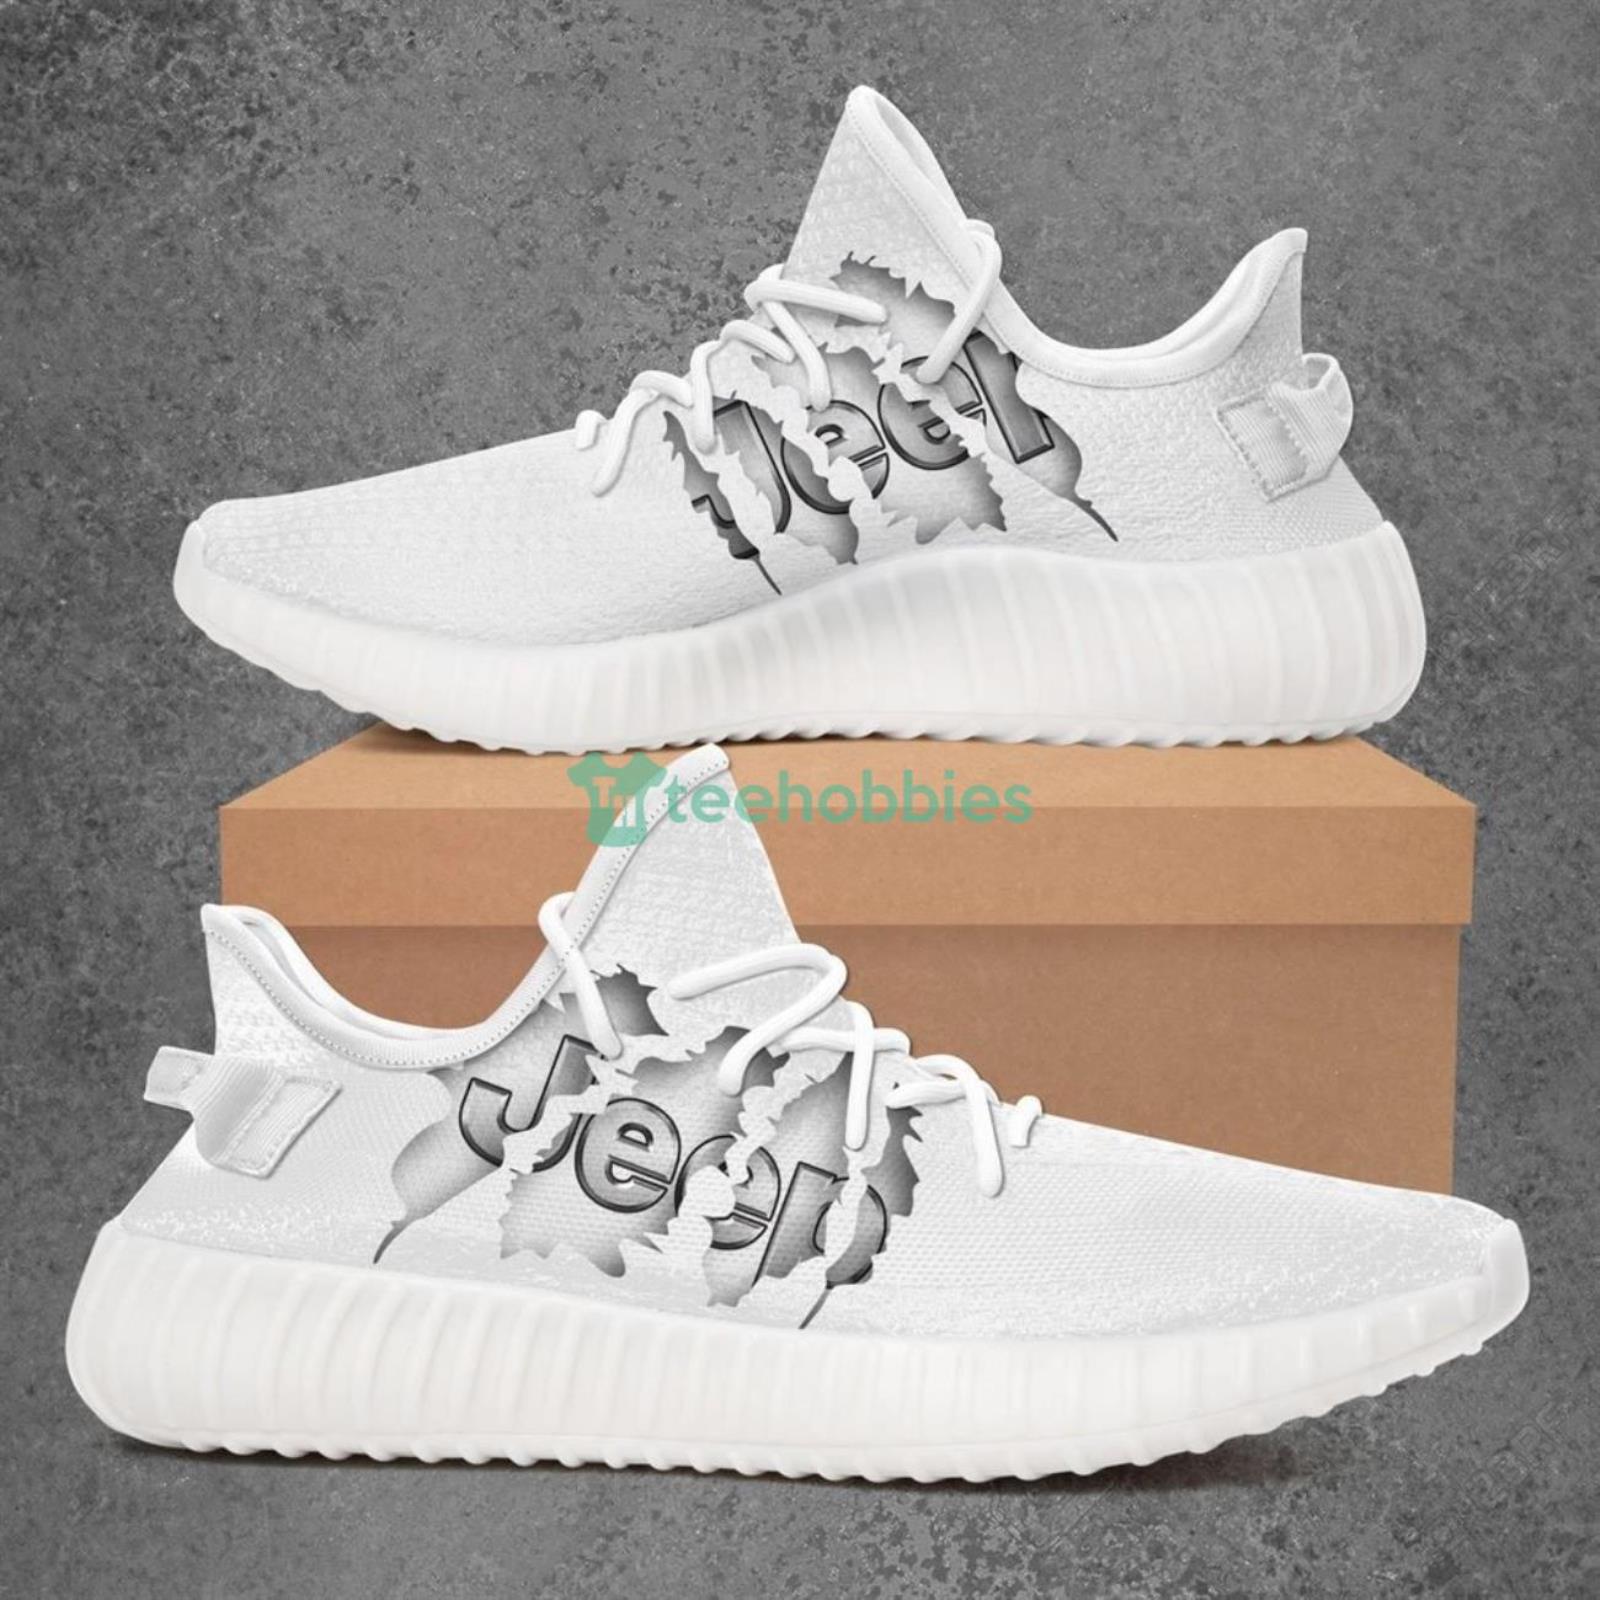 Jeep Car Yeezy White Shoes Sport Sneakers Product Photo 1 Product photo 1